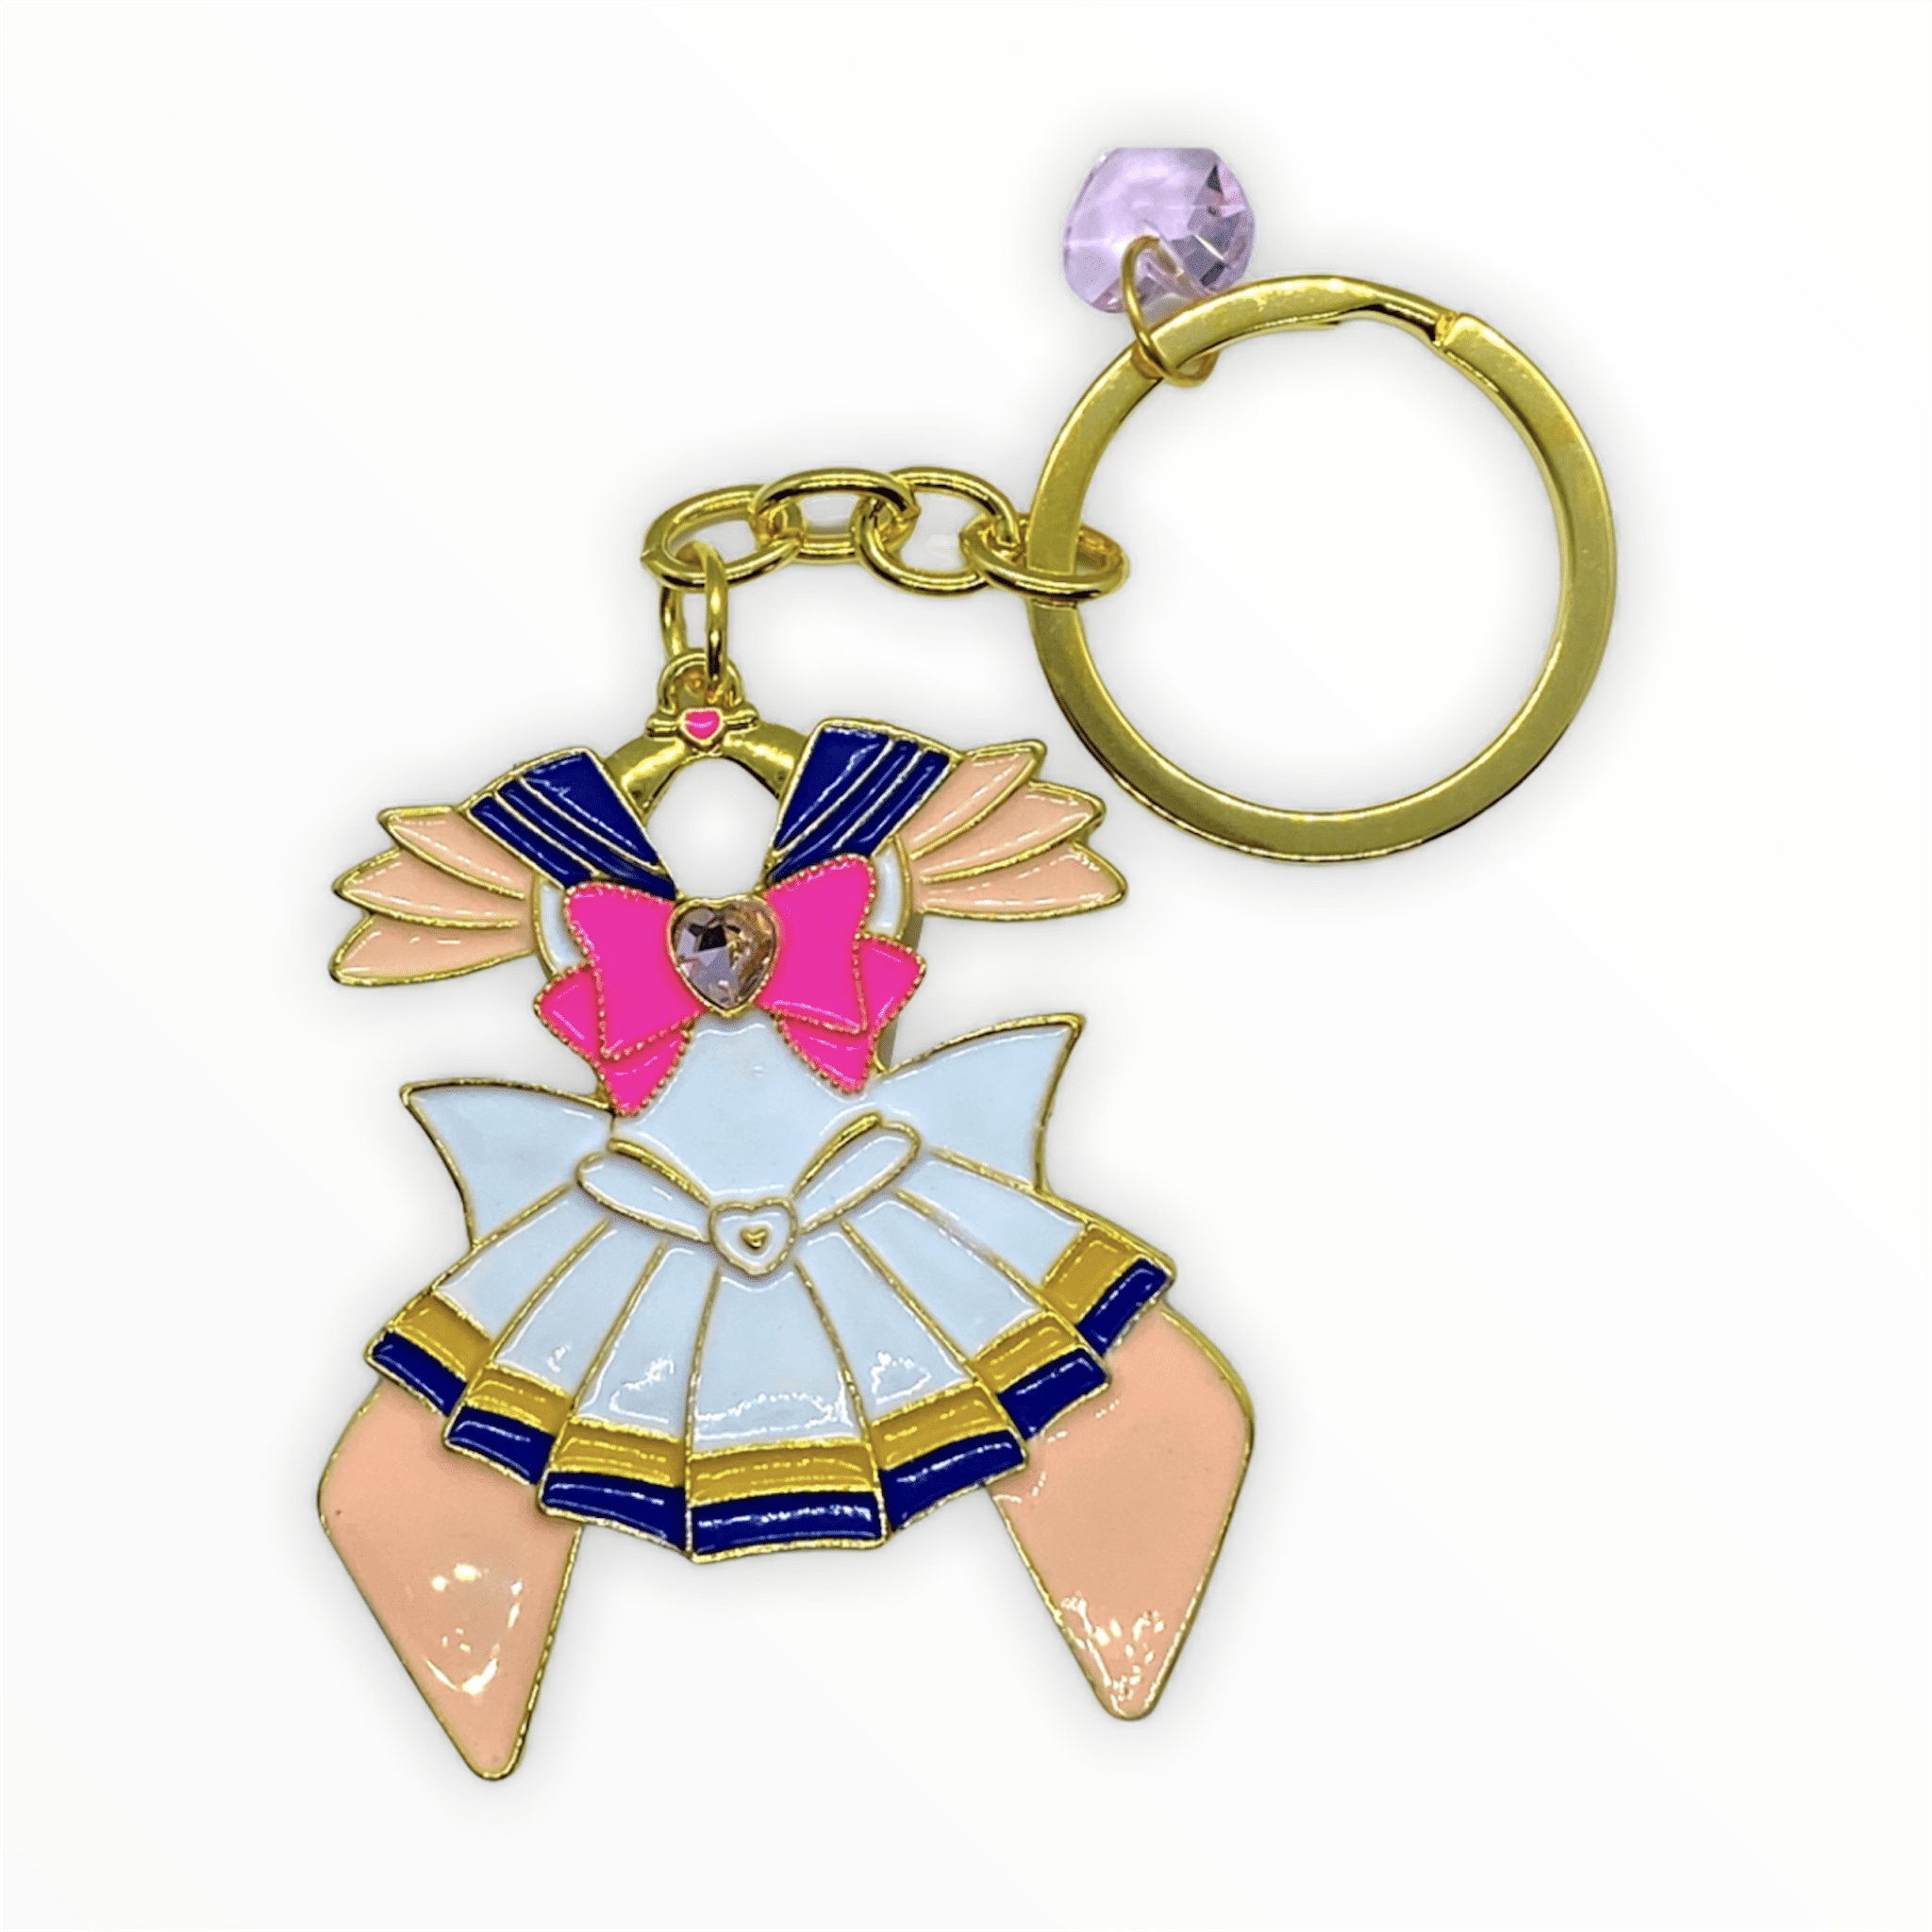 Details about  / Anime keychain